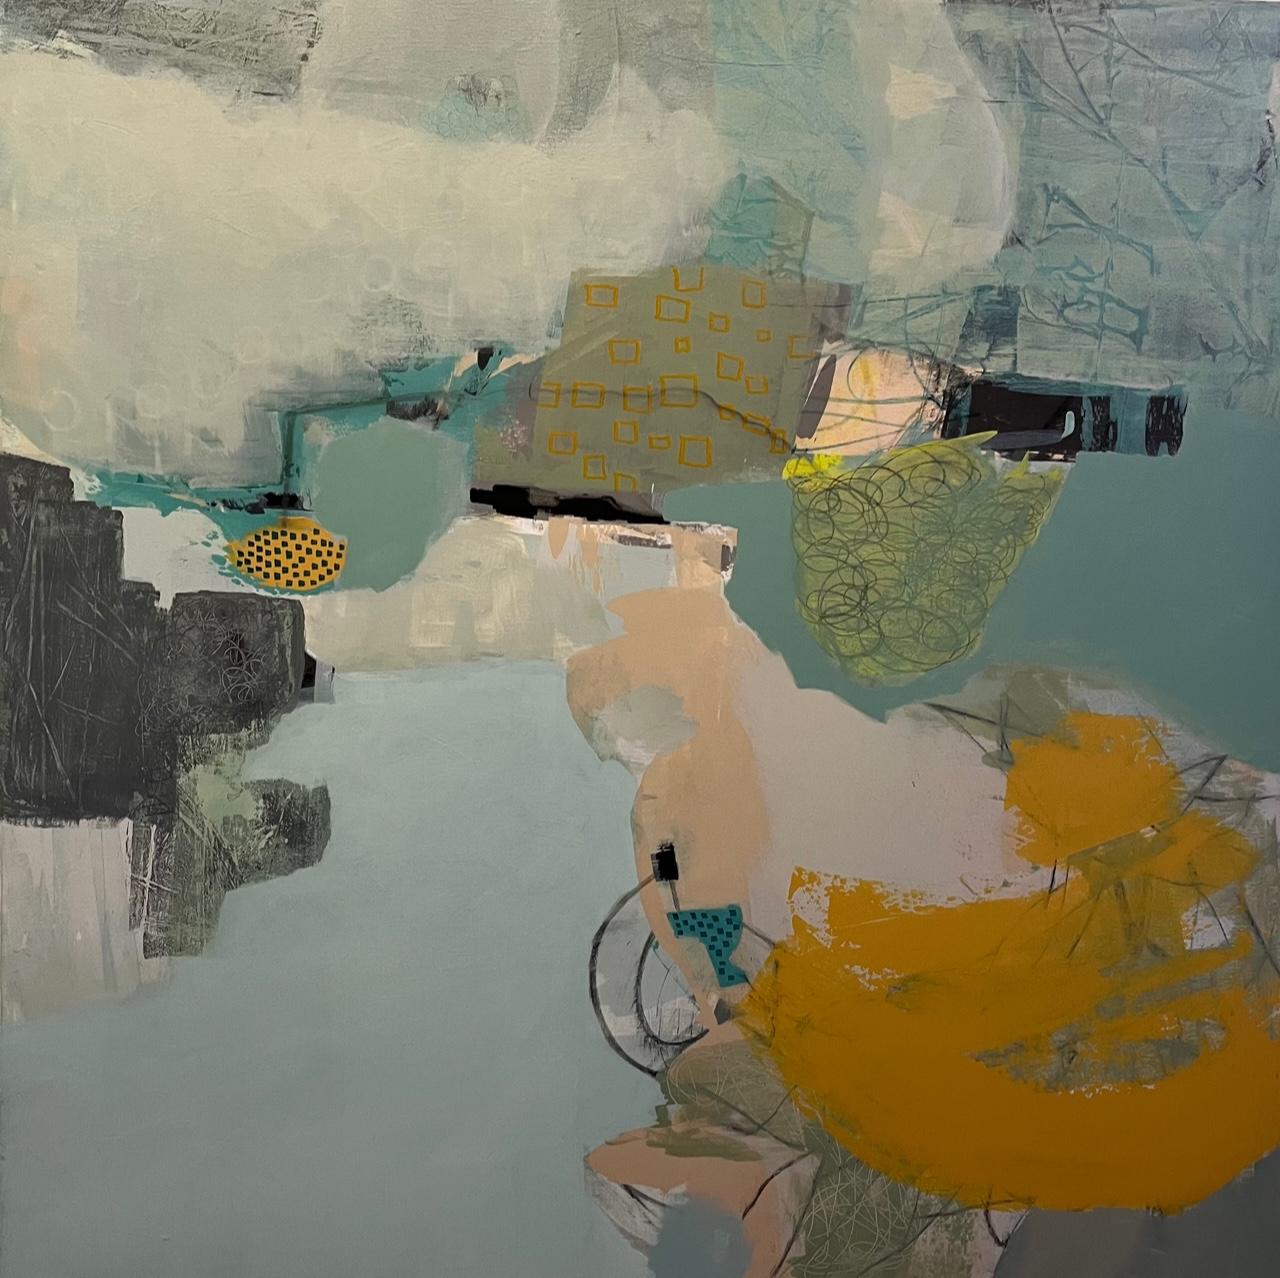 Walther’s layered abstracts explore how we balance our connection to the digital world with our connection to our inner selves and to nature. Her work is intended to take us on contemplative journeys of sorts by highlighting these realms. 

Jayne